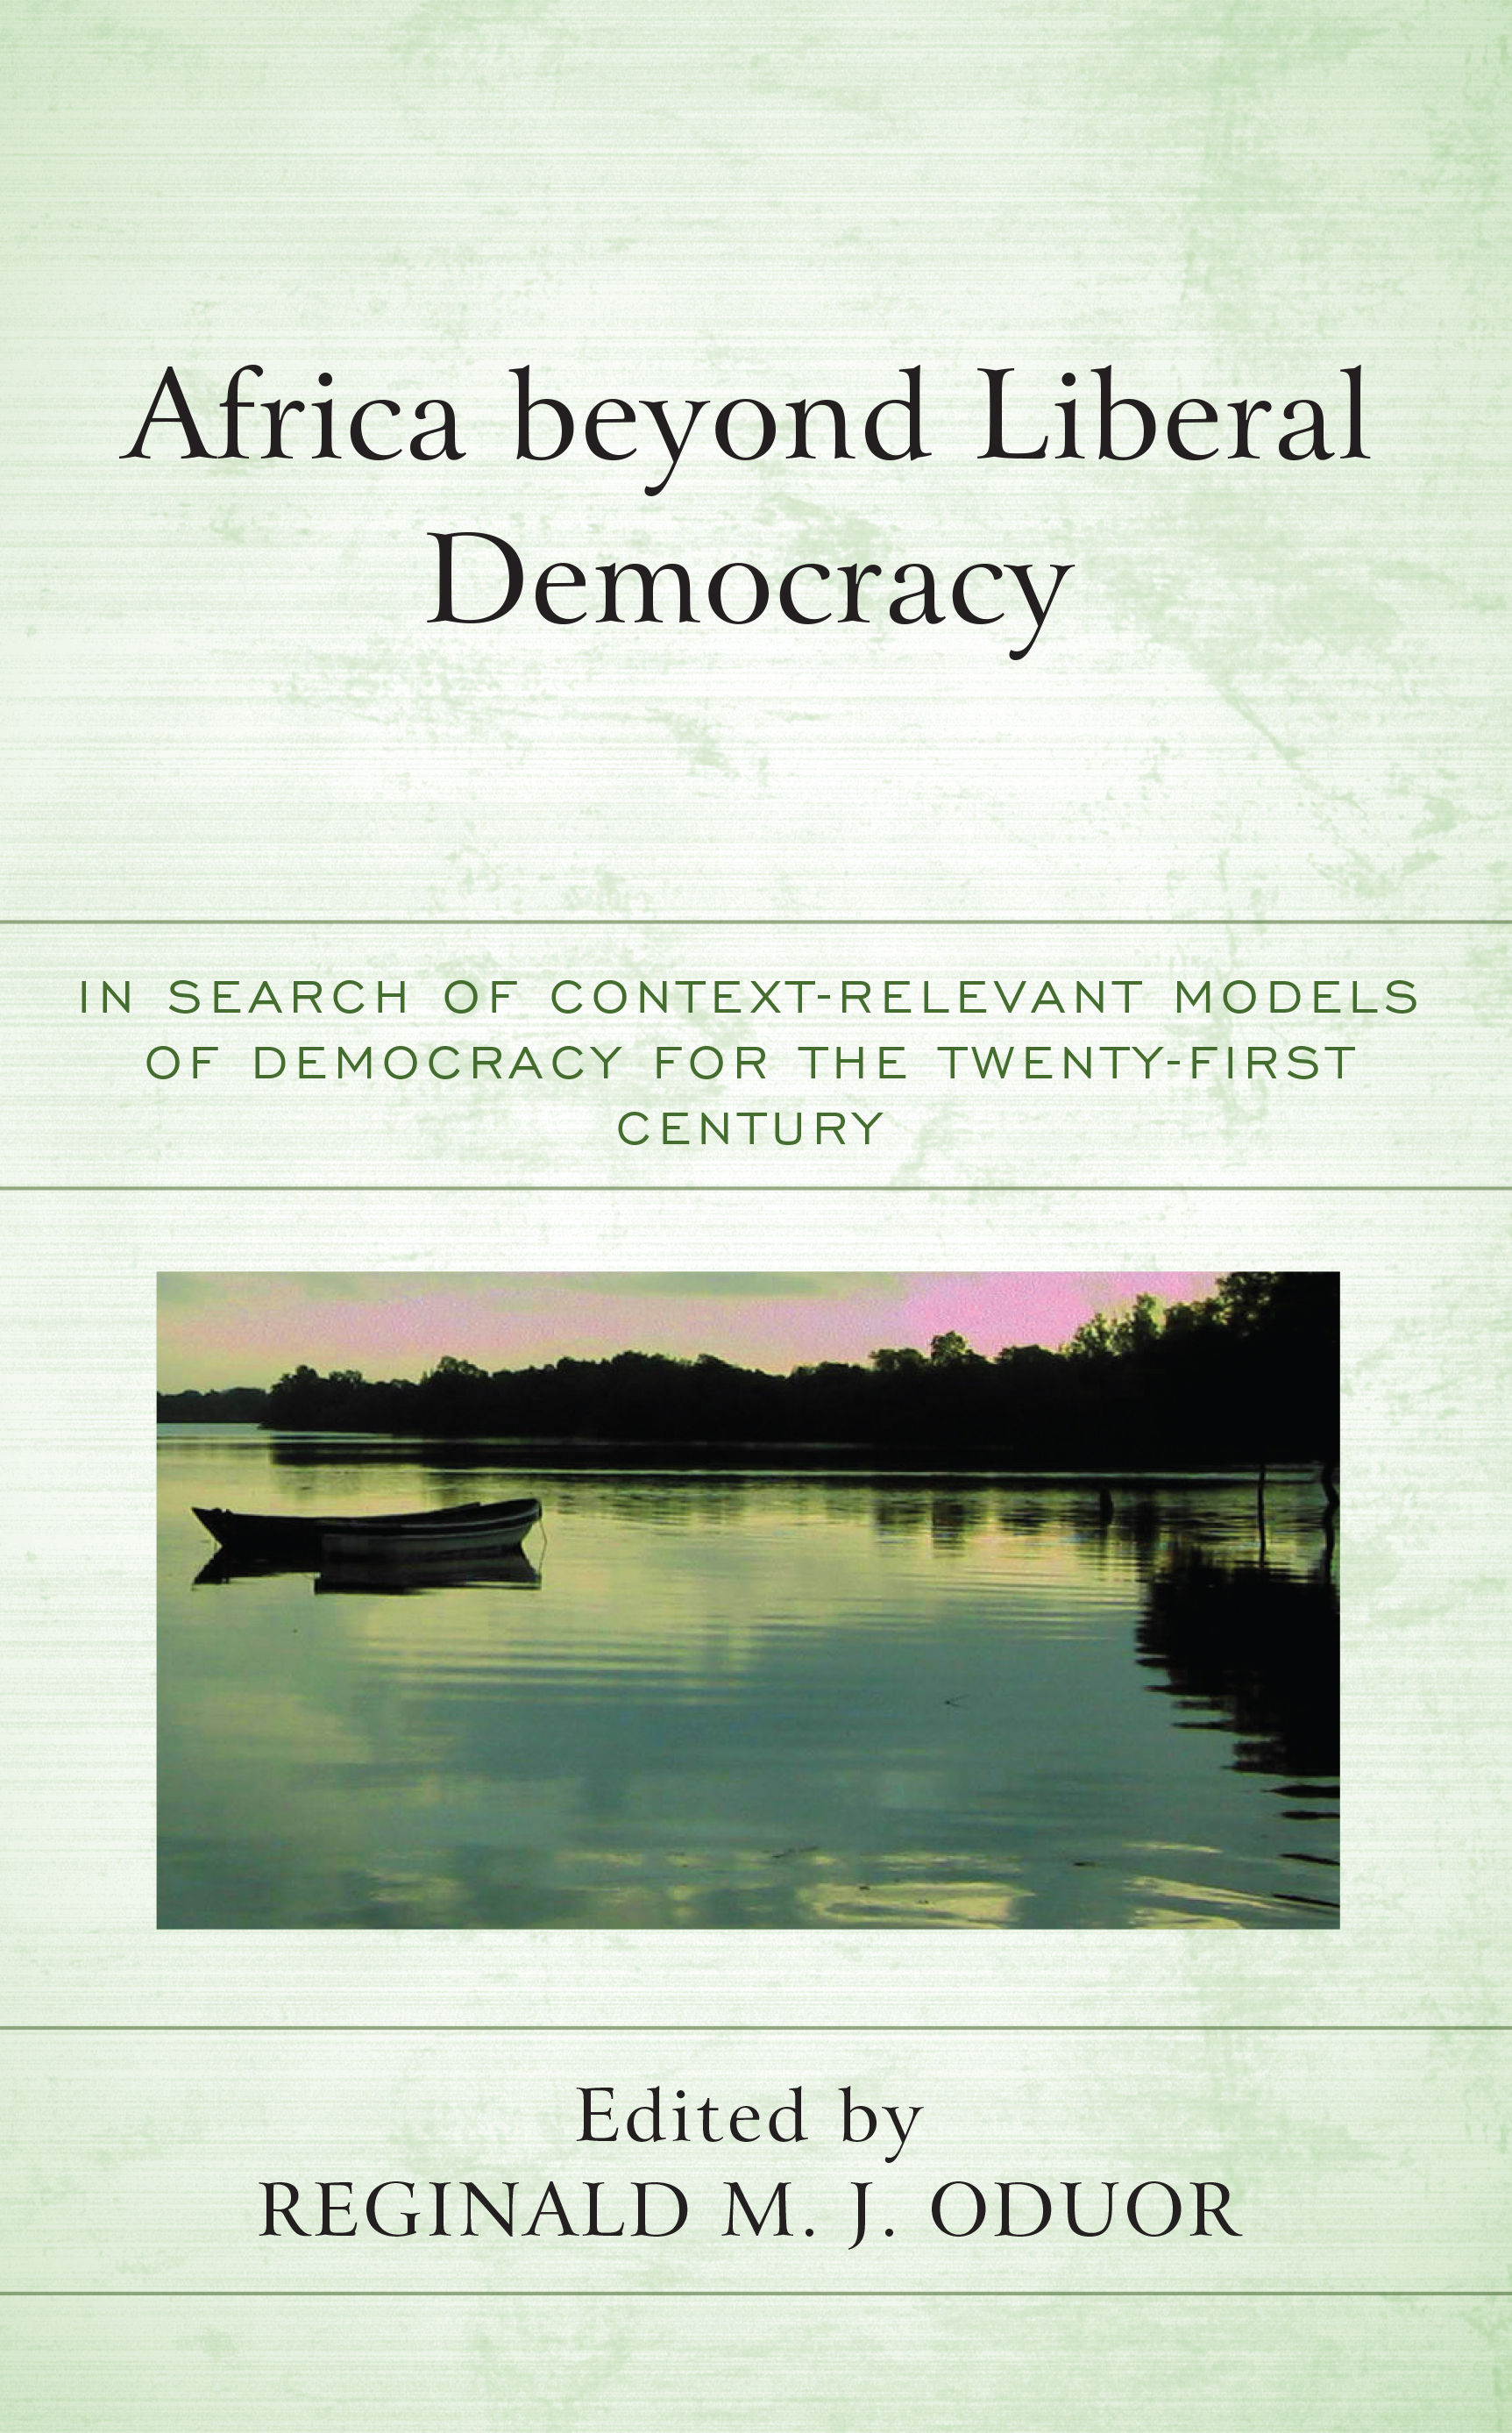 Africa beyond Liberal Democracy: In Search of Context-Relevant Models of Democracy for the Twenty-First Century